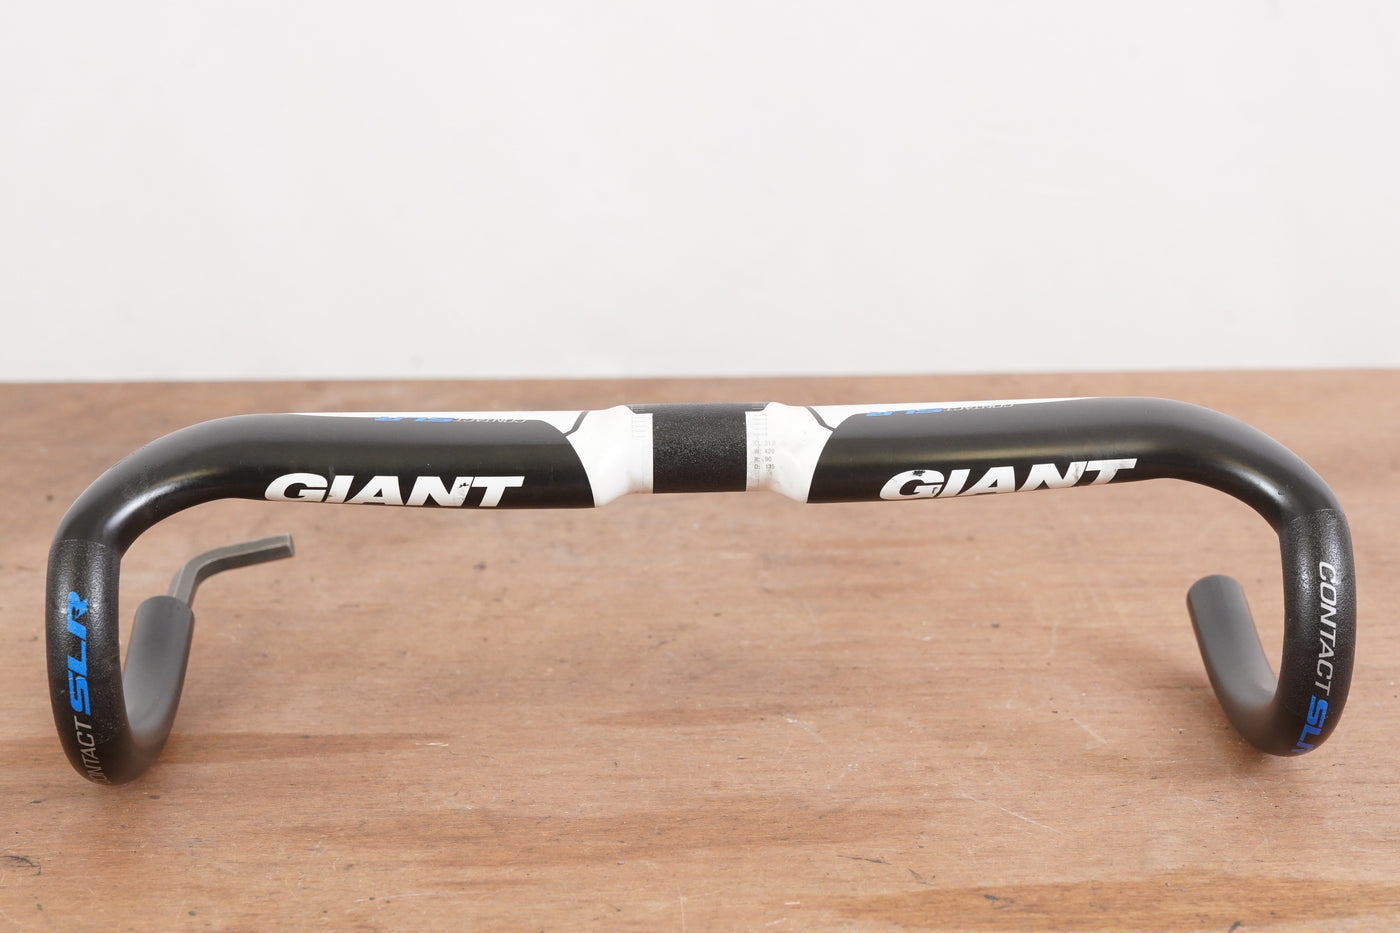 42cm Giant Contact SLR Compact Carbon Road Handlebar 31.8mm